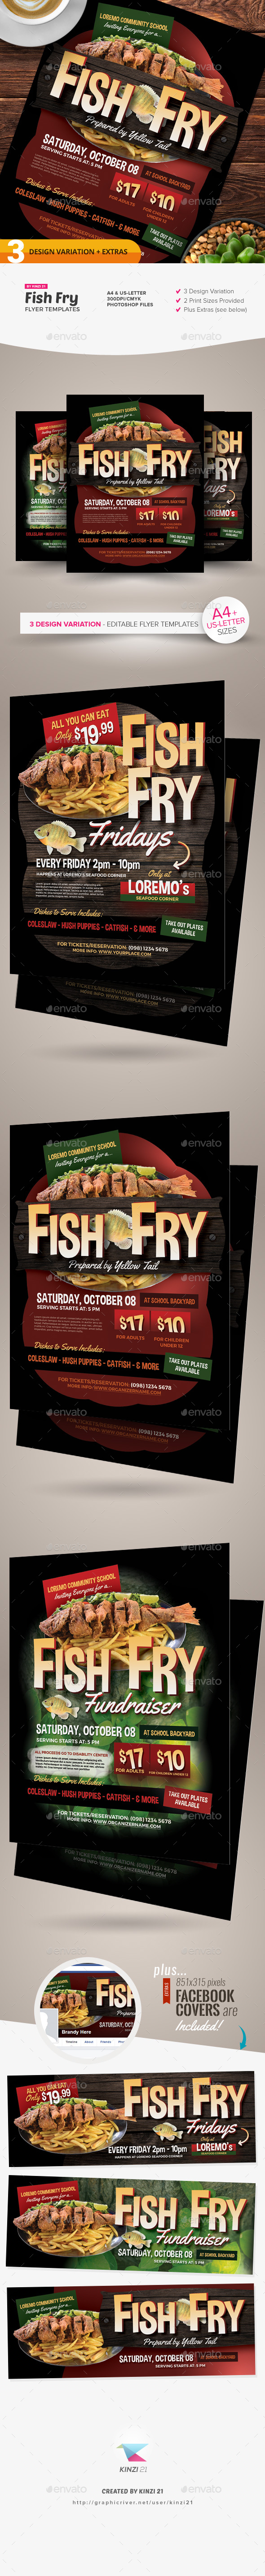 Fish Fry Flyer Templates In Fish Fry Flyer Template